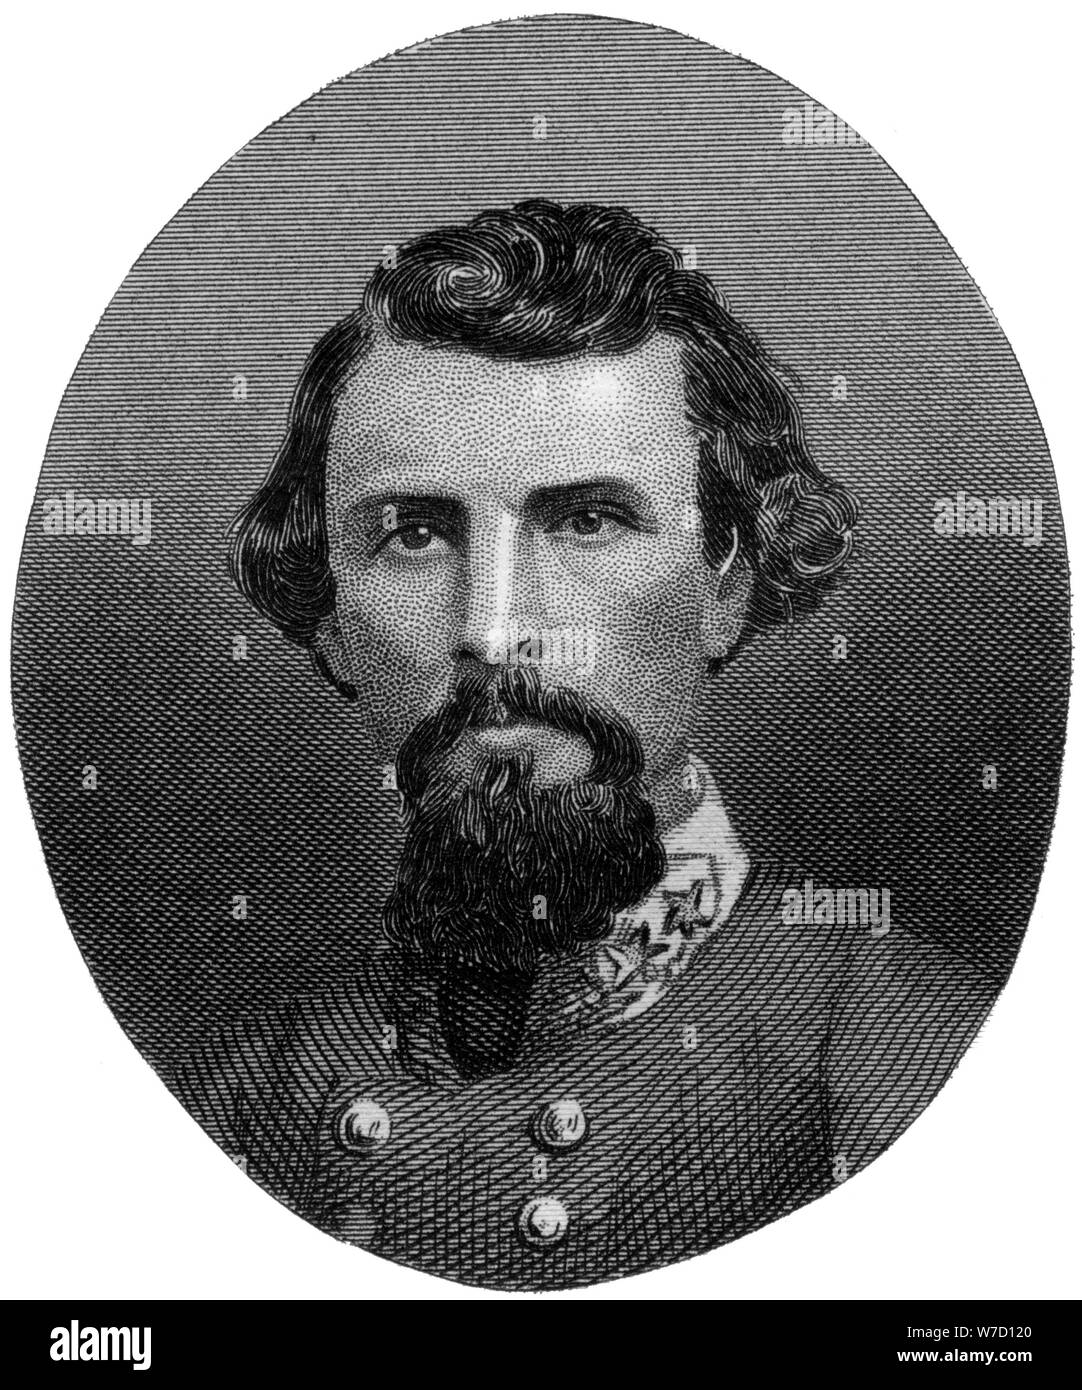 Nathan Bedford Forrest, Confederate general, 1862-1867.Artist: J Rogers Stock Photo